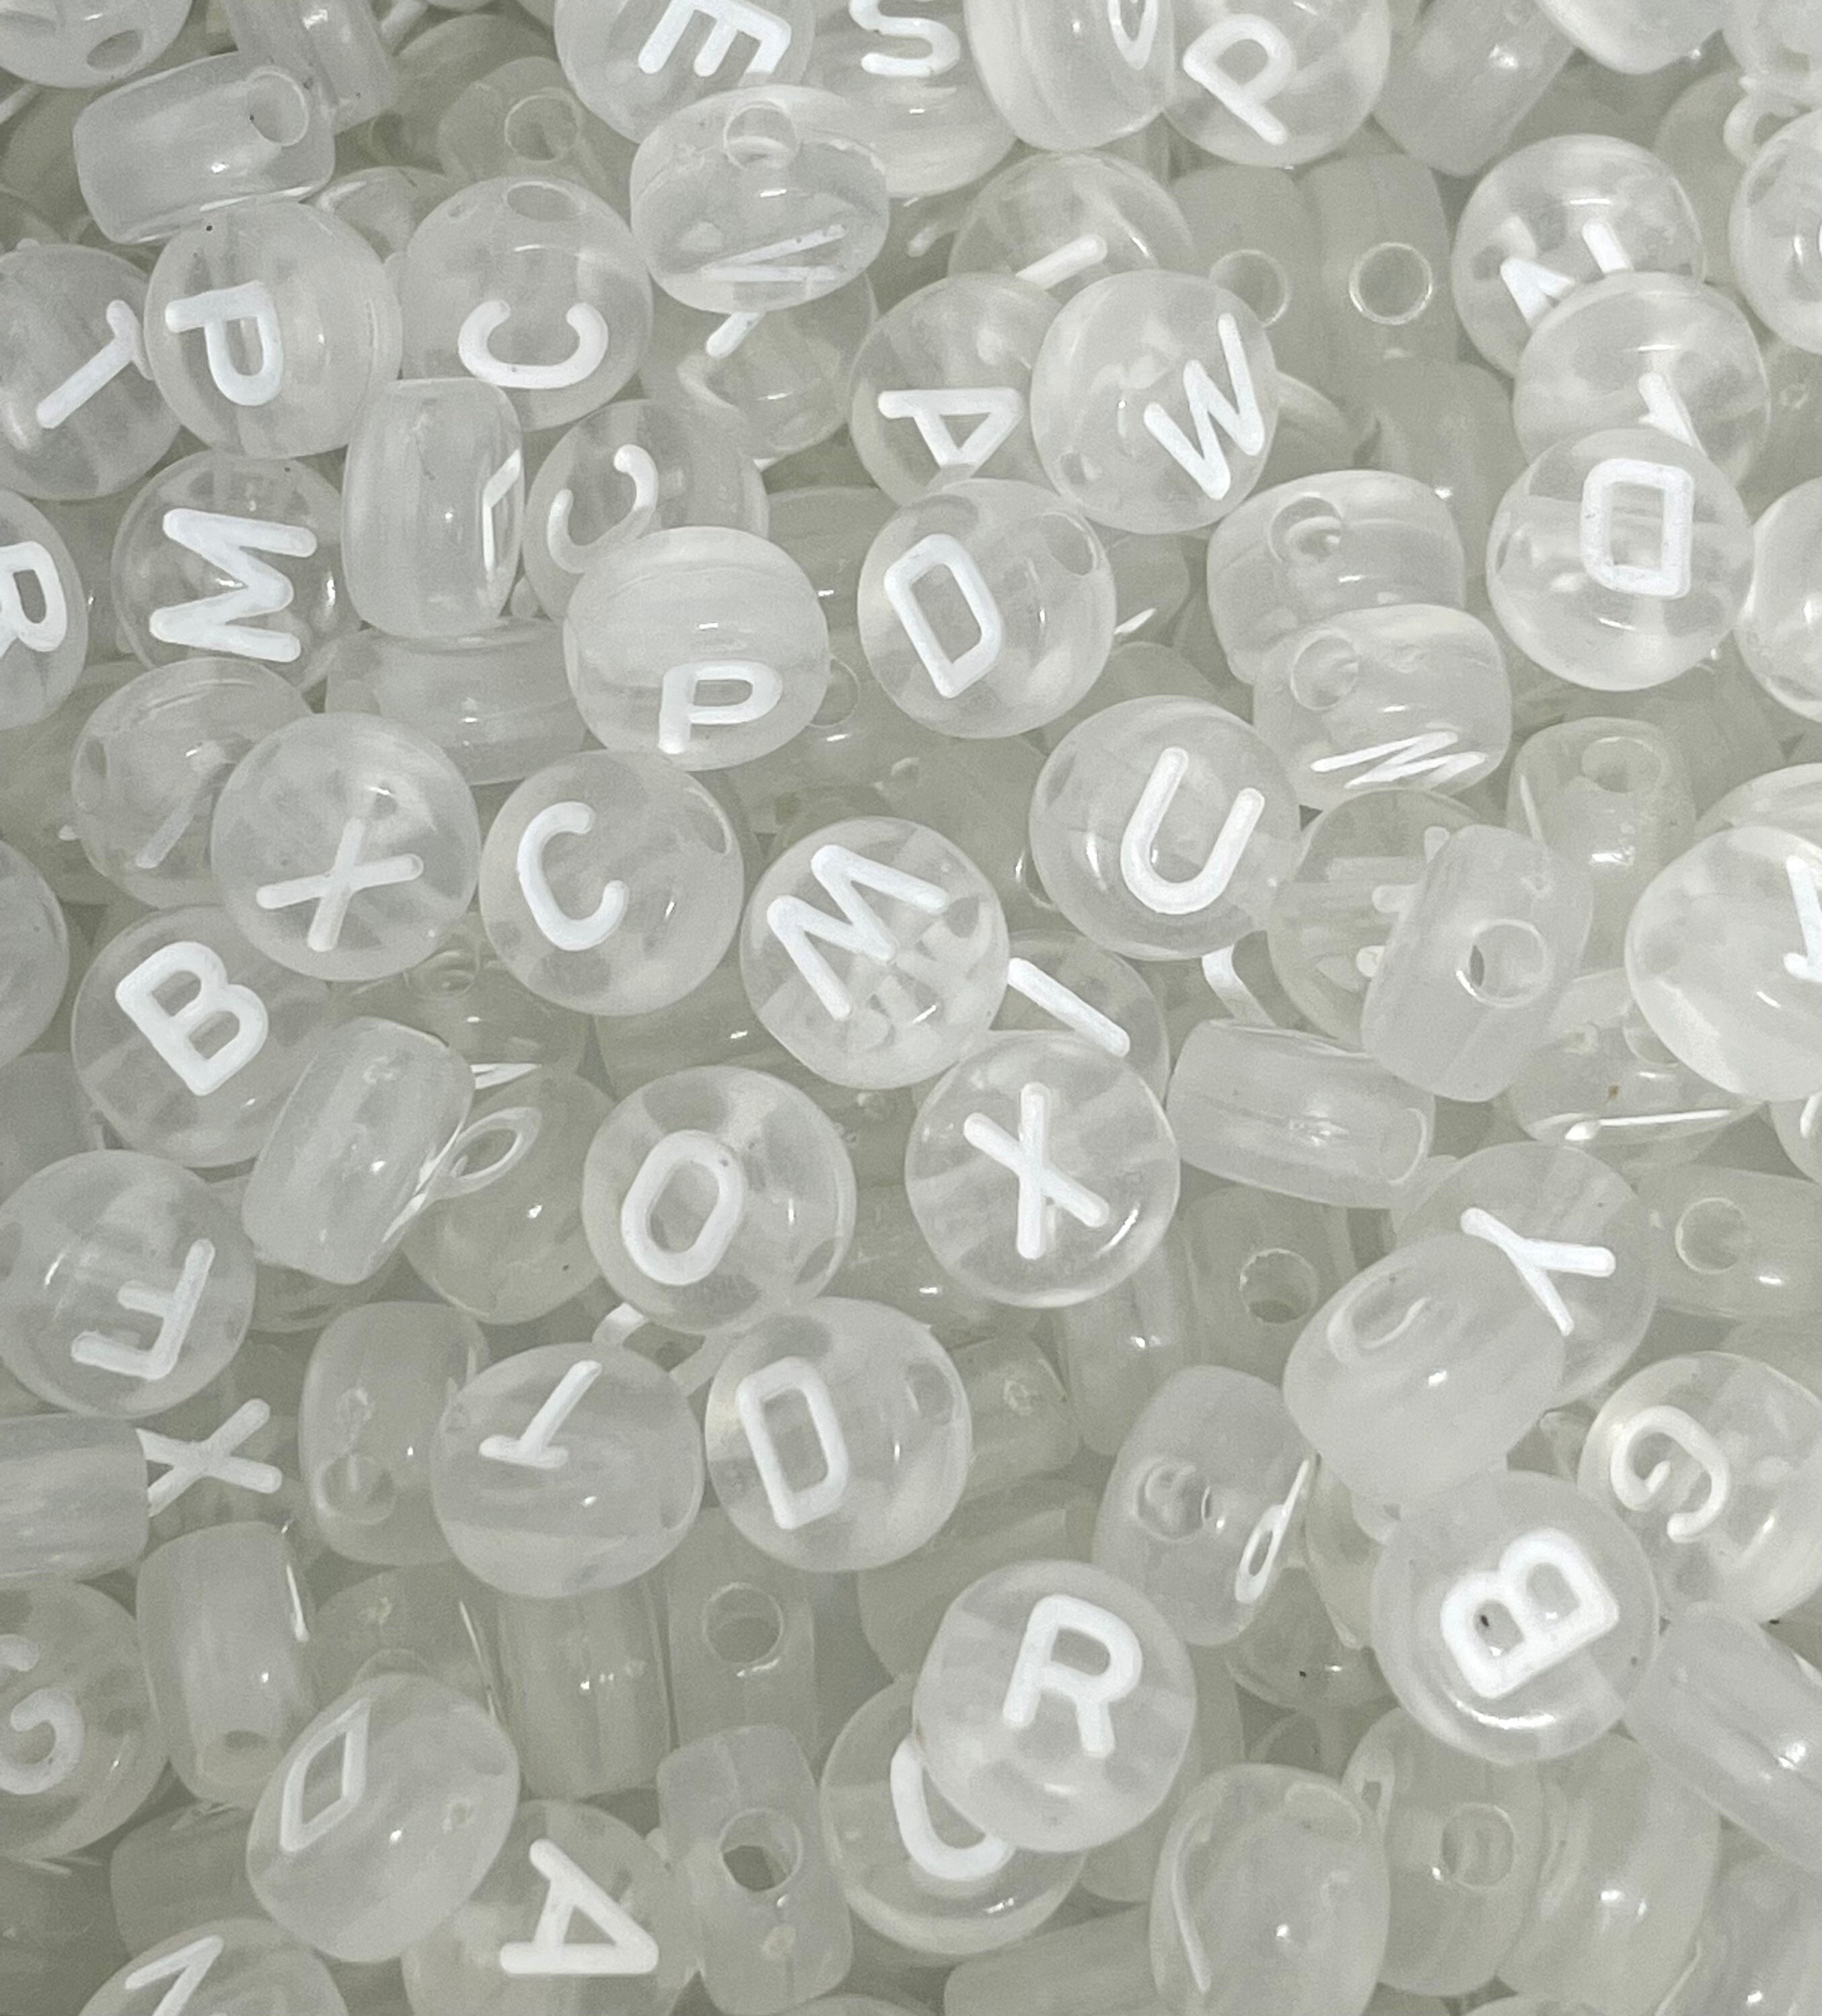 Bulk Letter Beads 600 Silver color coin beads Acrylic alphabets beads  crafting and jewelry making supply - Fleamarket Muse